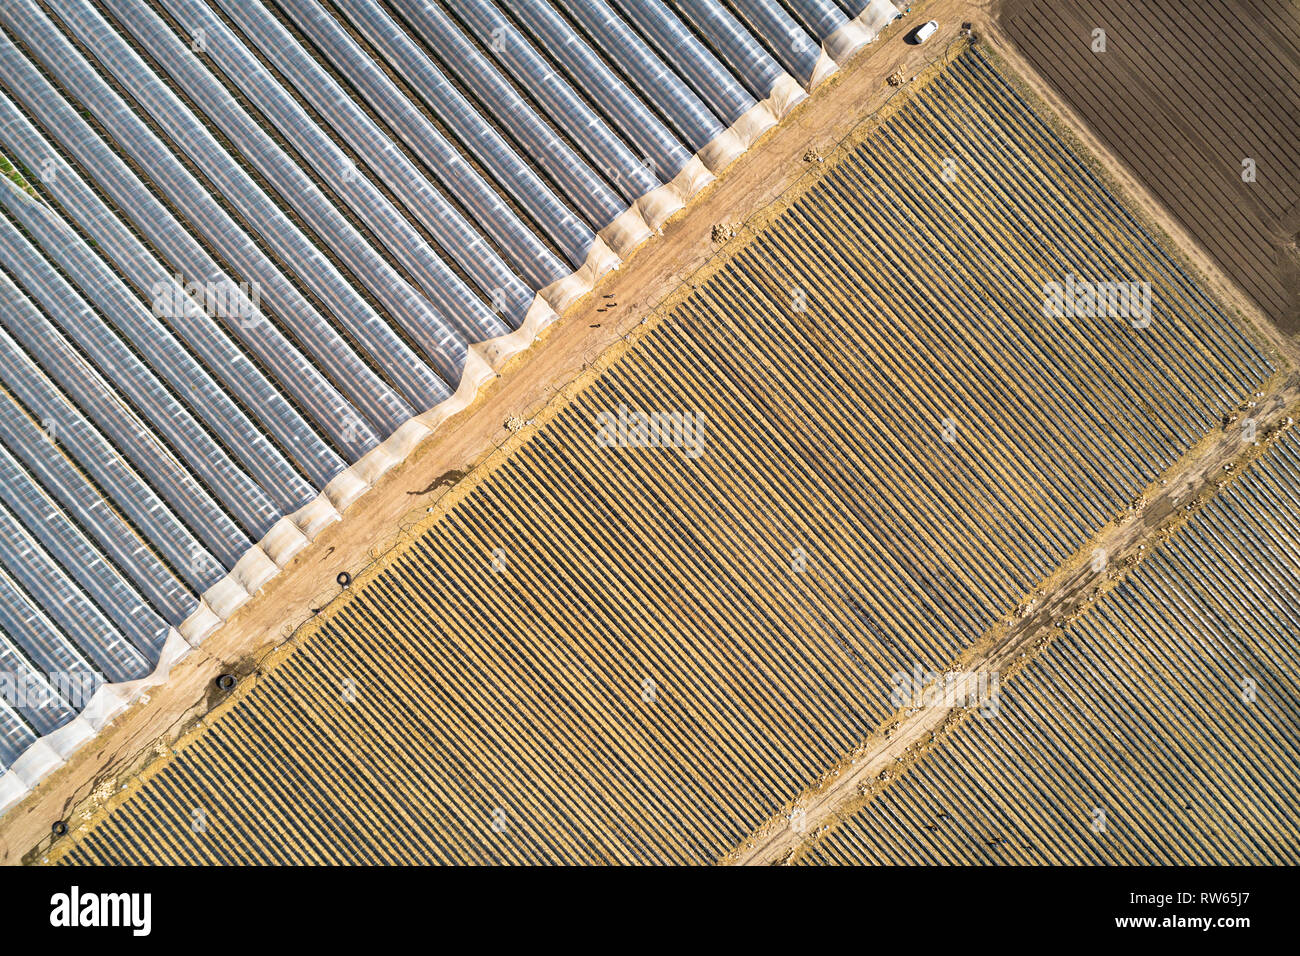 Aerial image showing poly tunnels used for growing soft fruit near Perth, Perthshire, Scotland. Stock Photo